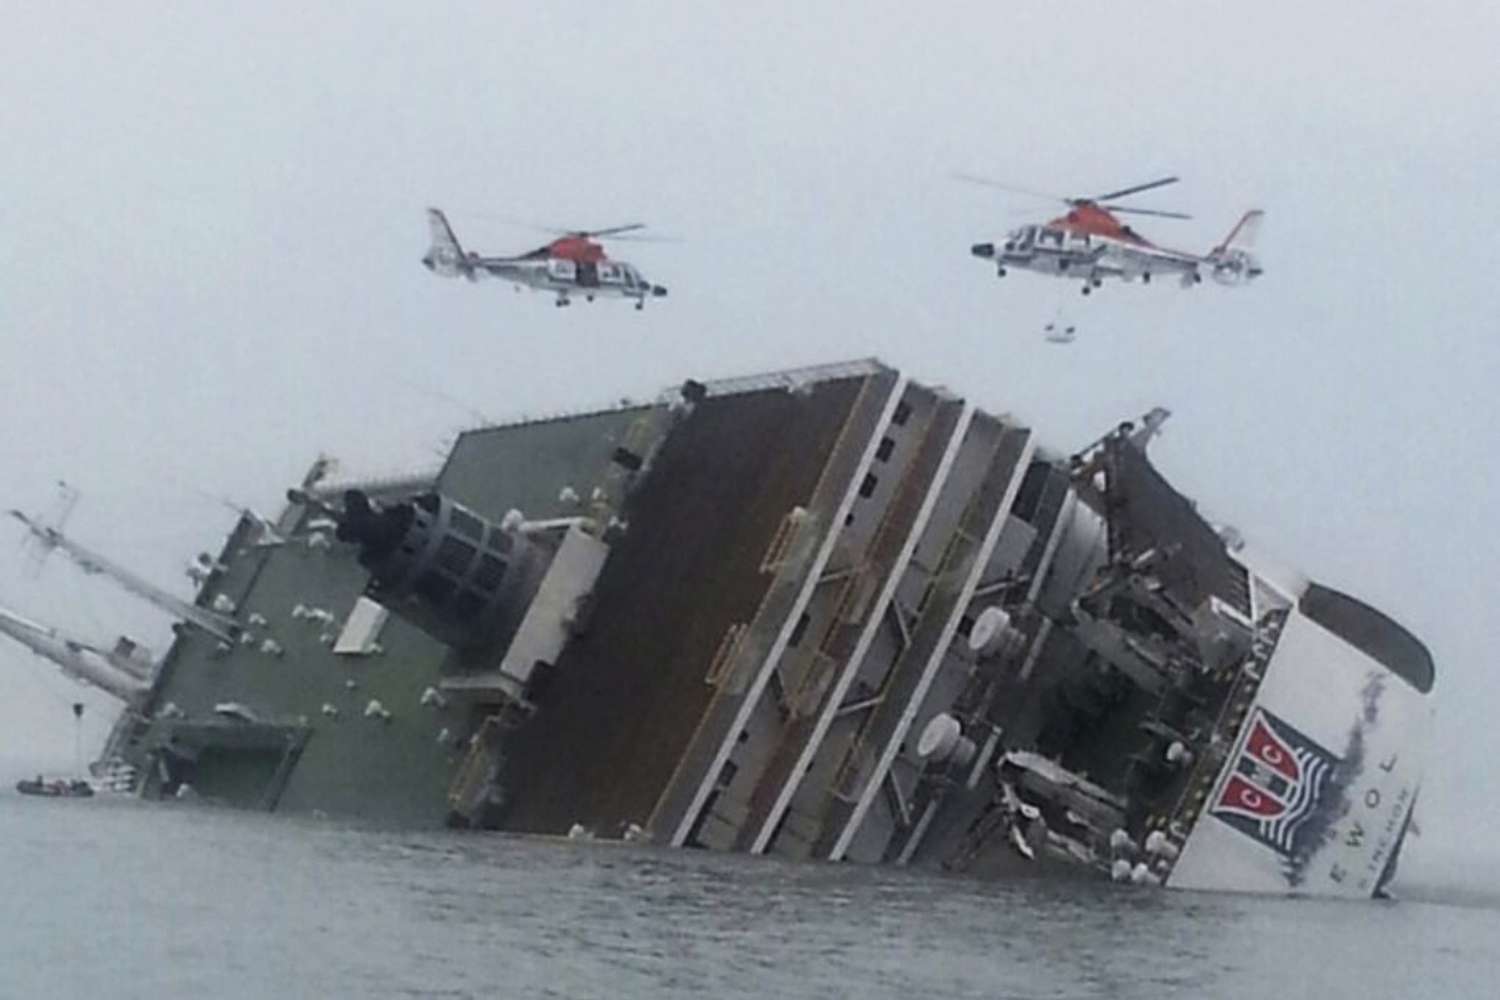 Rescue helicopters flying over the passenger ship <em>Sewol</em> as it sinks in waters off South Korea's southwestern coast on April 16, 2014 (Yonhap—EPA)